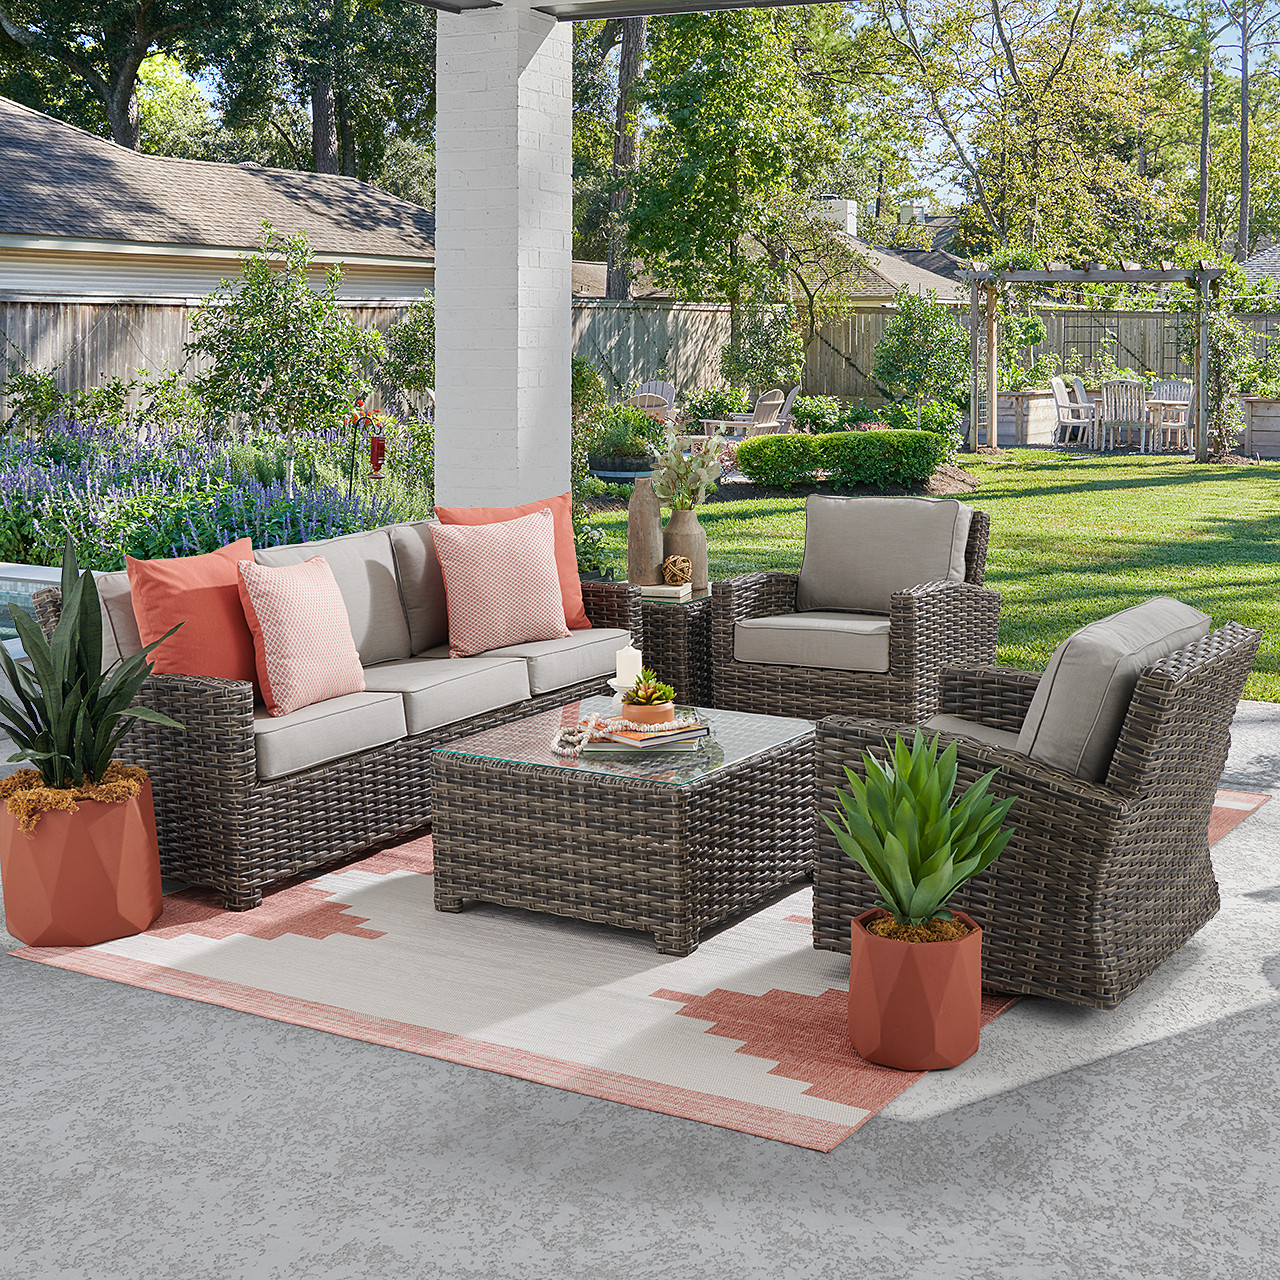 Contempo Husk Outdoor Wicker with Cushions 4 Piece Swivel Sofa Group + 32 in. Sq. Glass Top Coffee Table